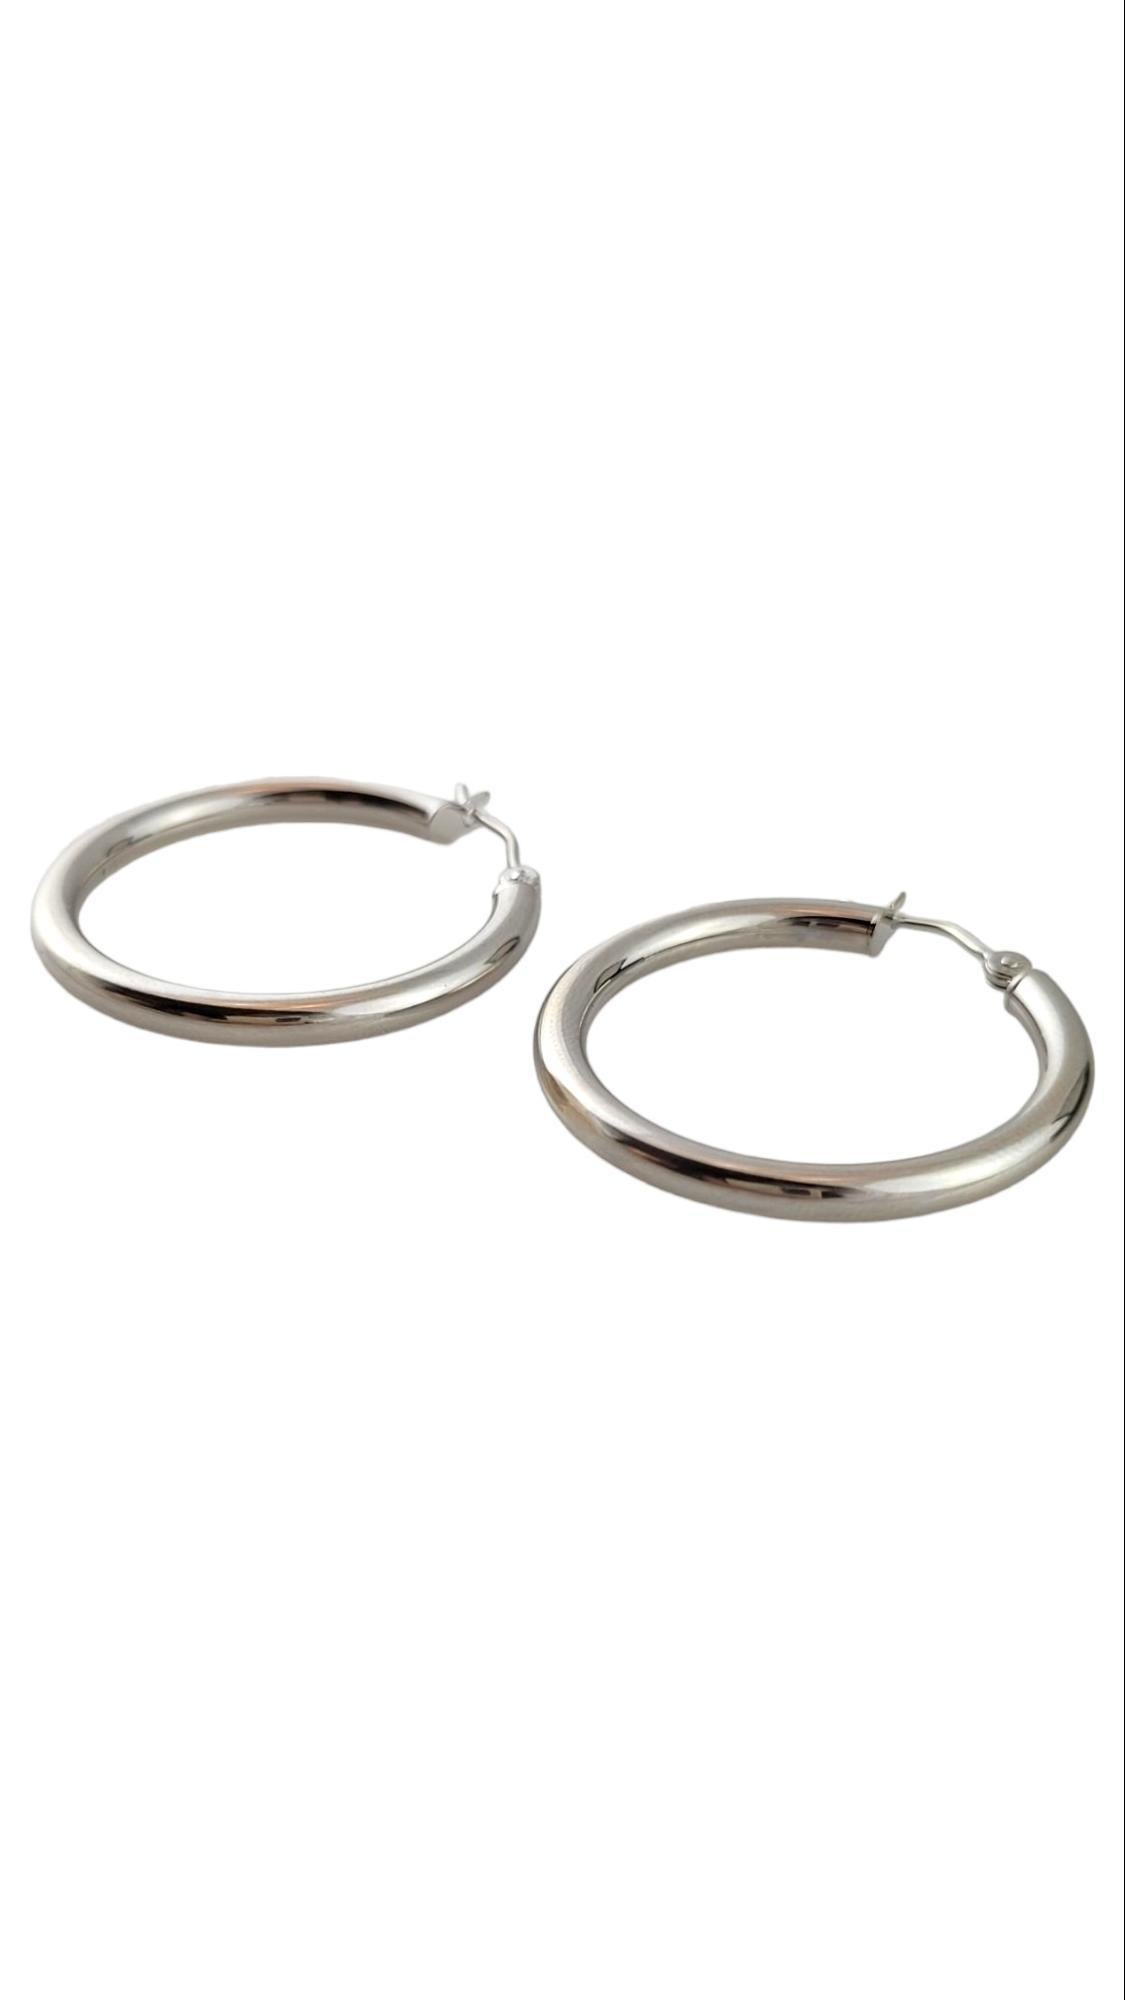 14K White Gold Hoop Earrings #15166 In Good Condition For Sale In Washington Depot, CT